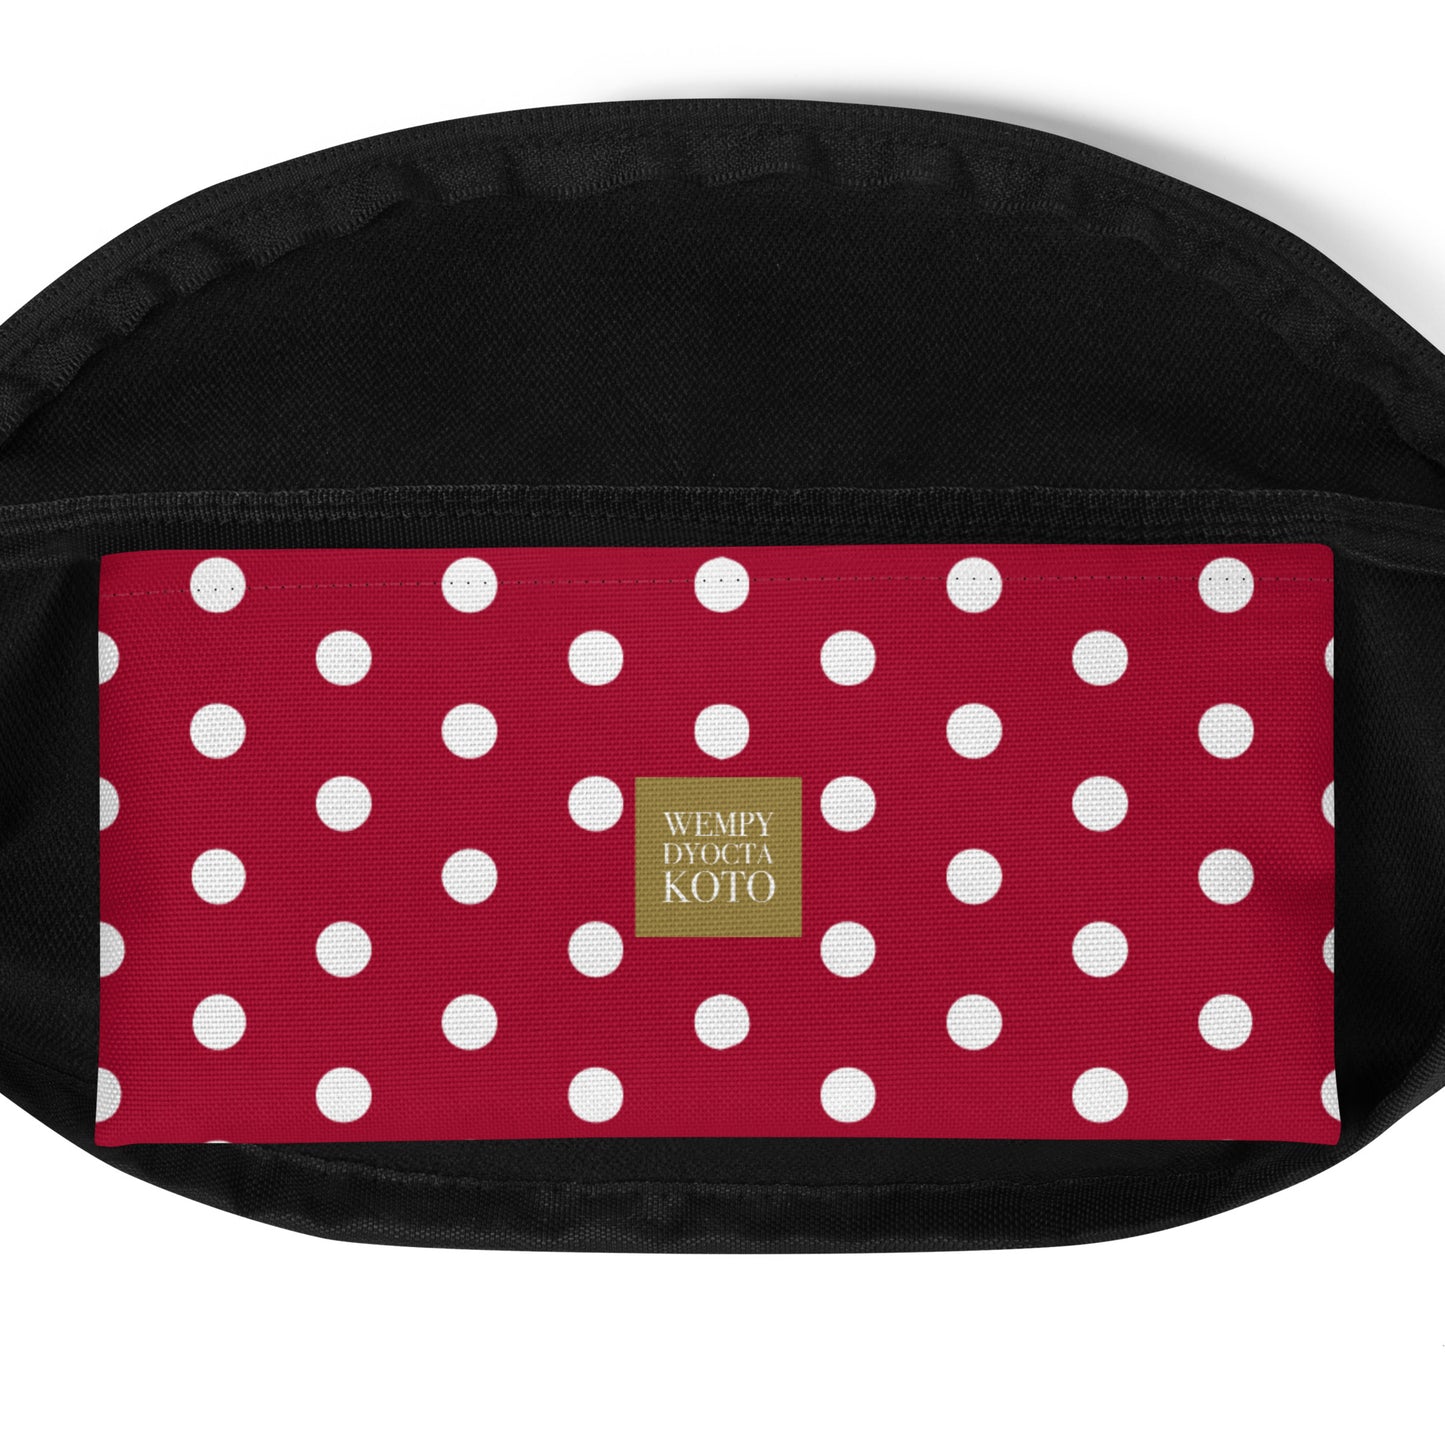 Maroon Polka Dot - Inspired By Taylor Swift - Sustainably Made Fanny Pack